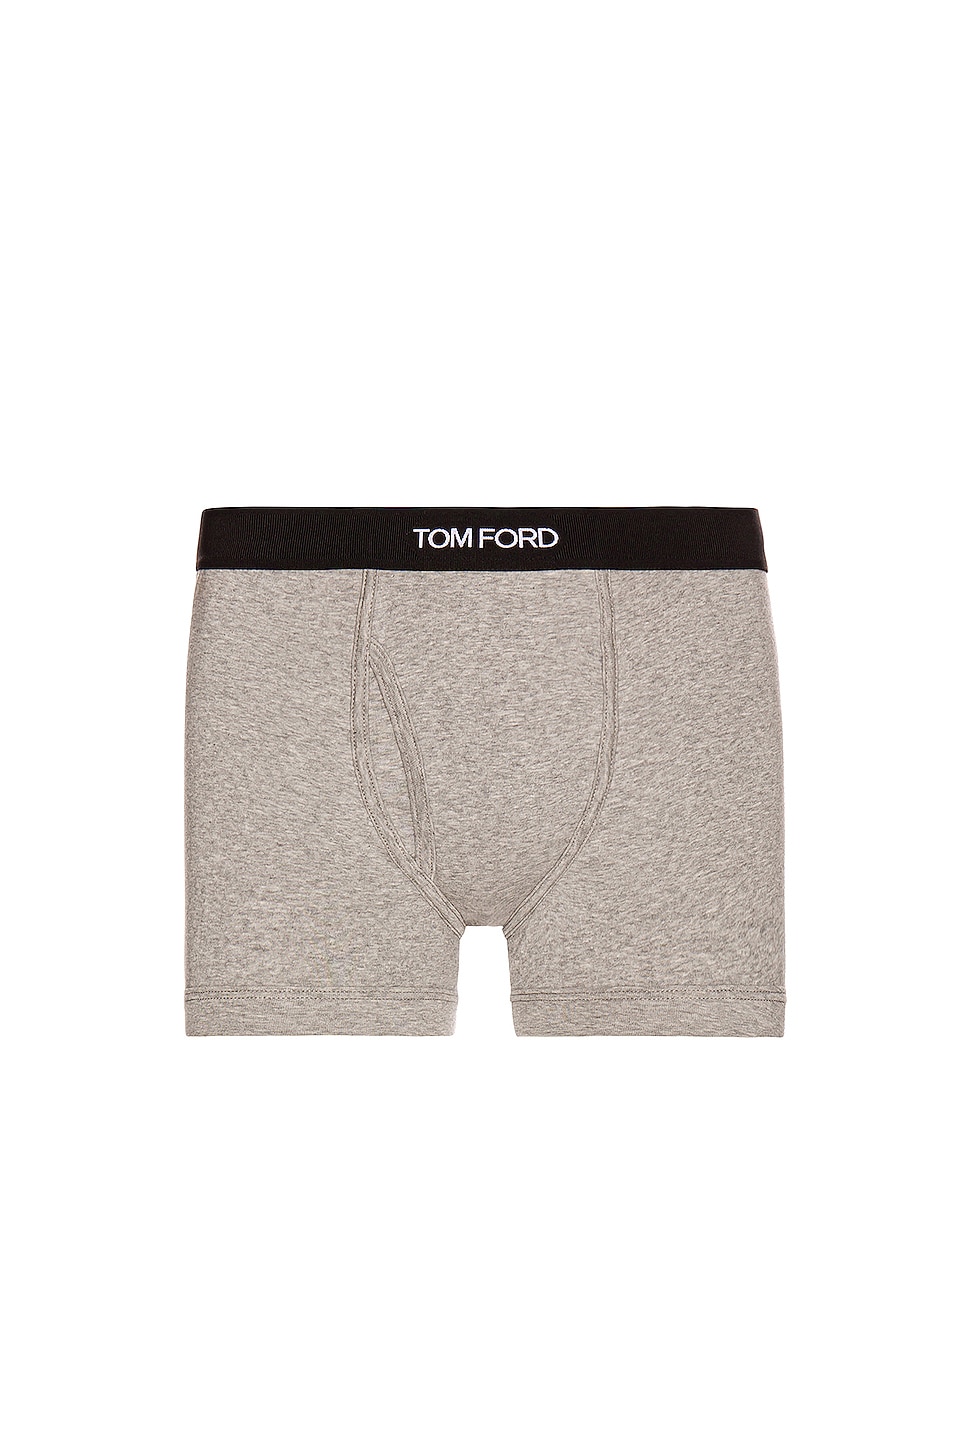 Image 1 of TOM FORD Boxer Brief in Grey